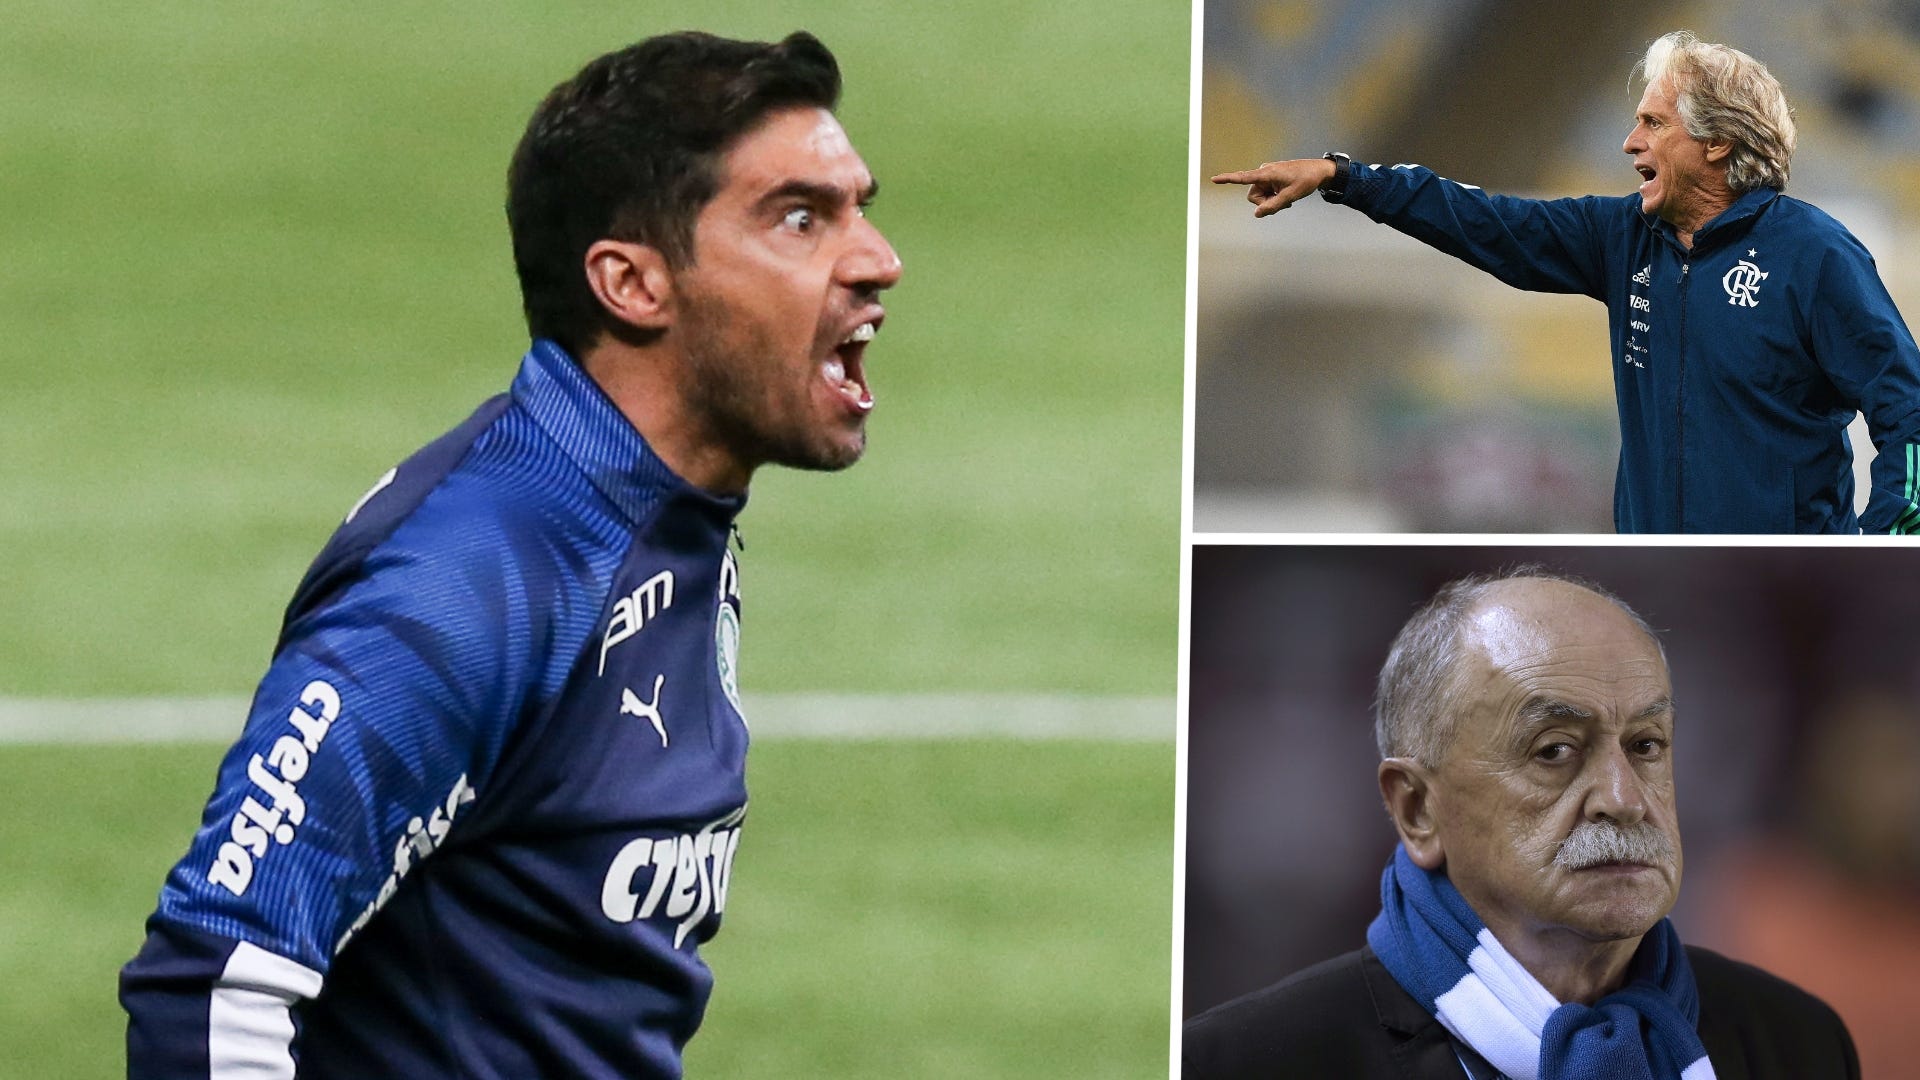 In football, it is kill or be killed' - Ferreira the latest European coach  to shine in South America